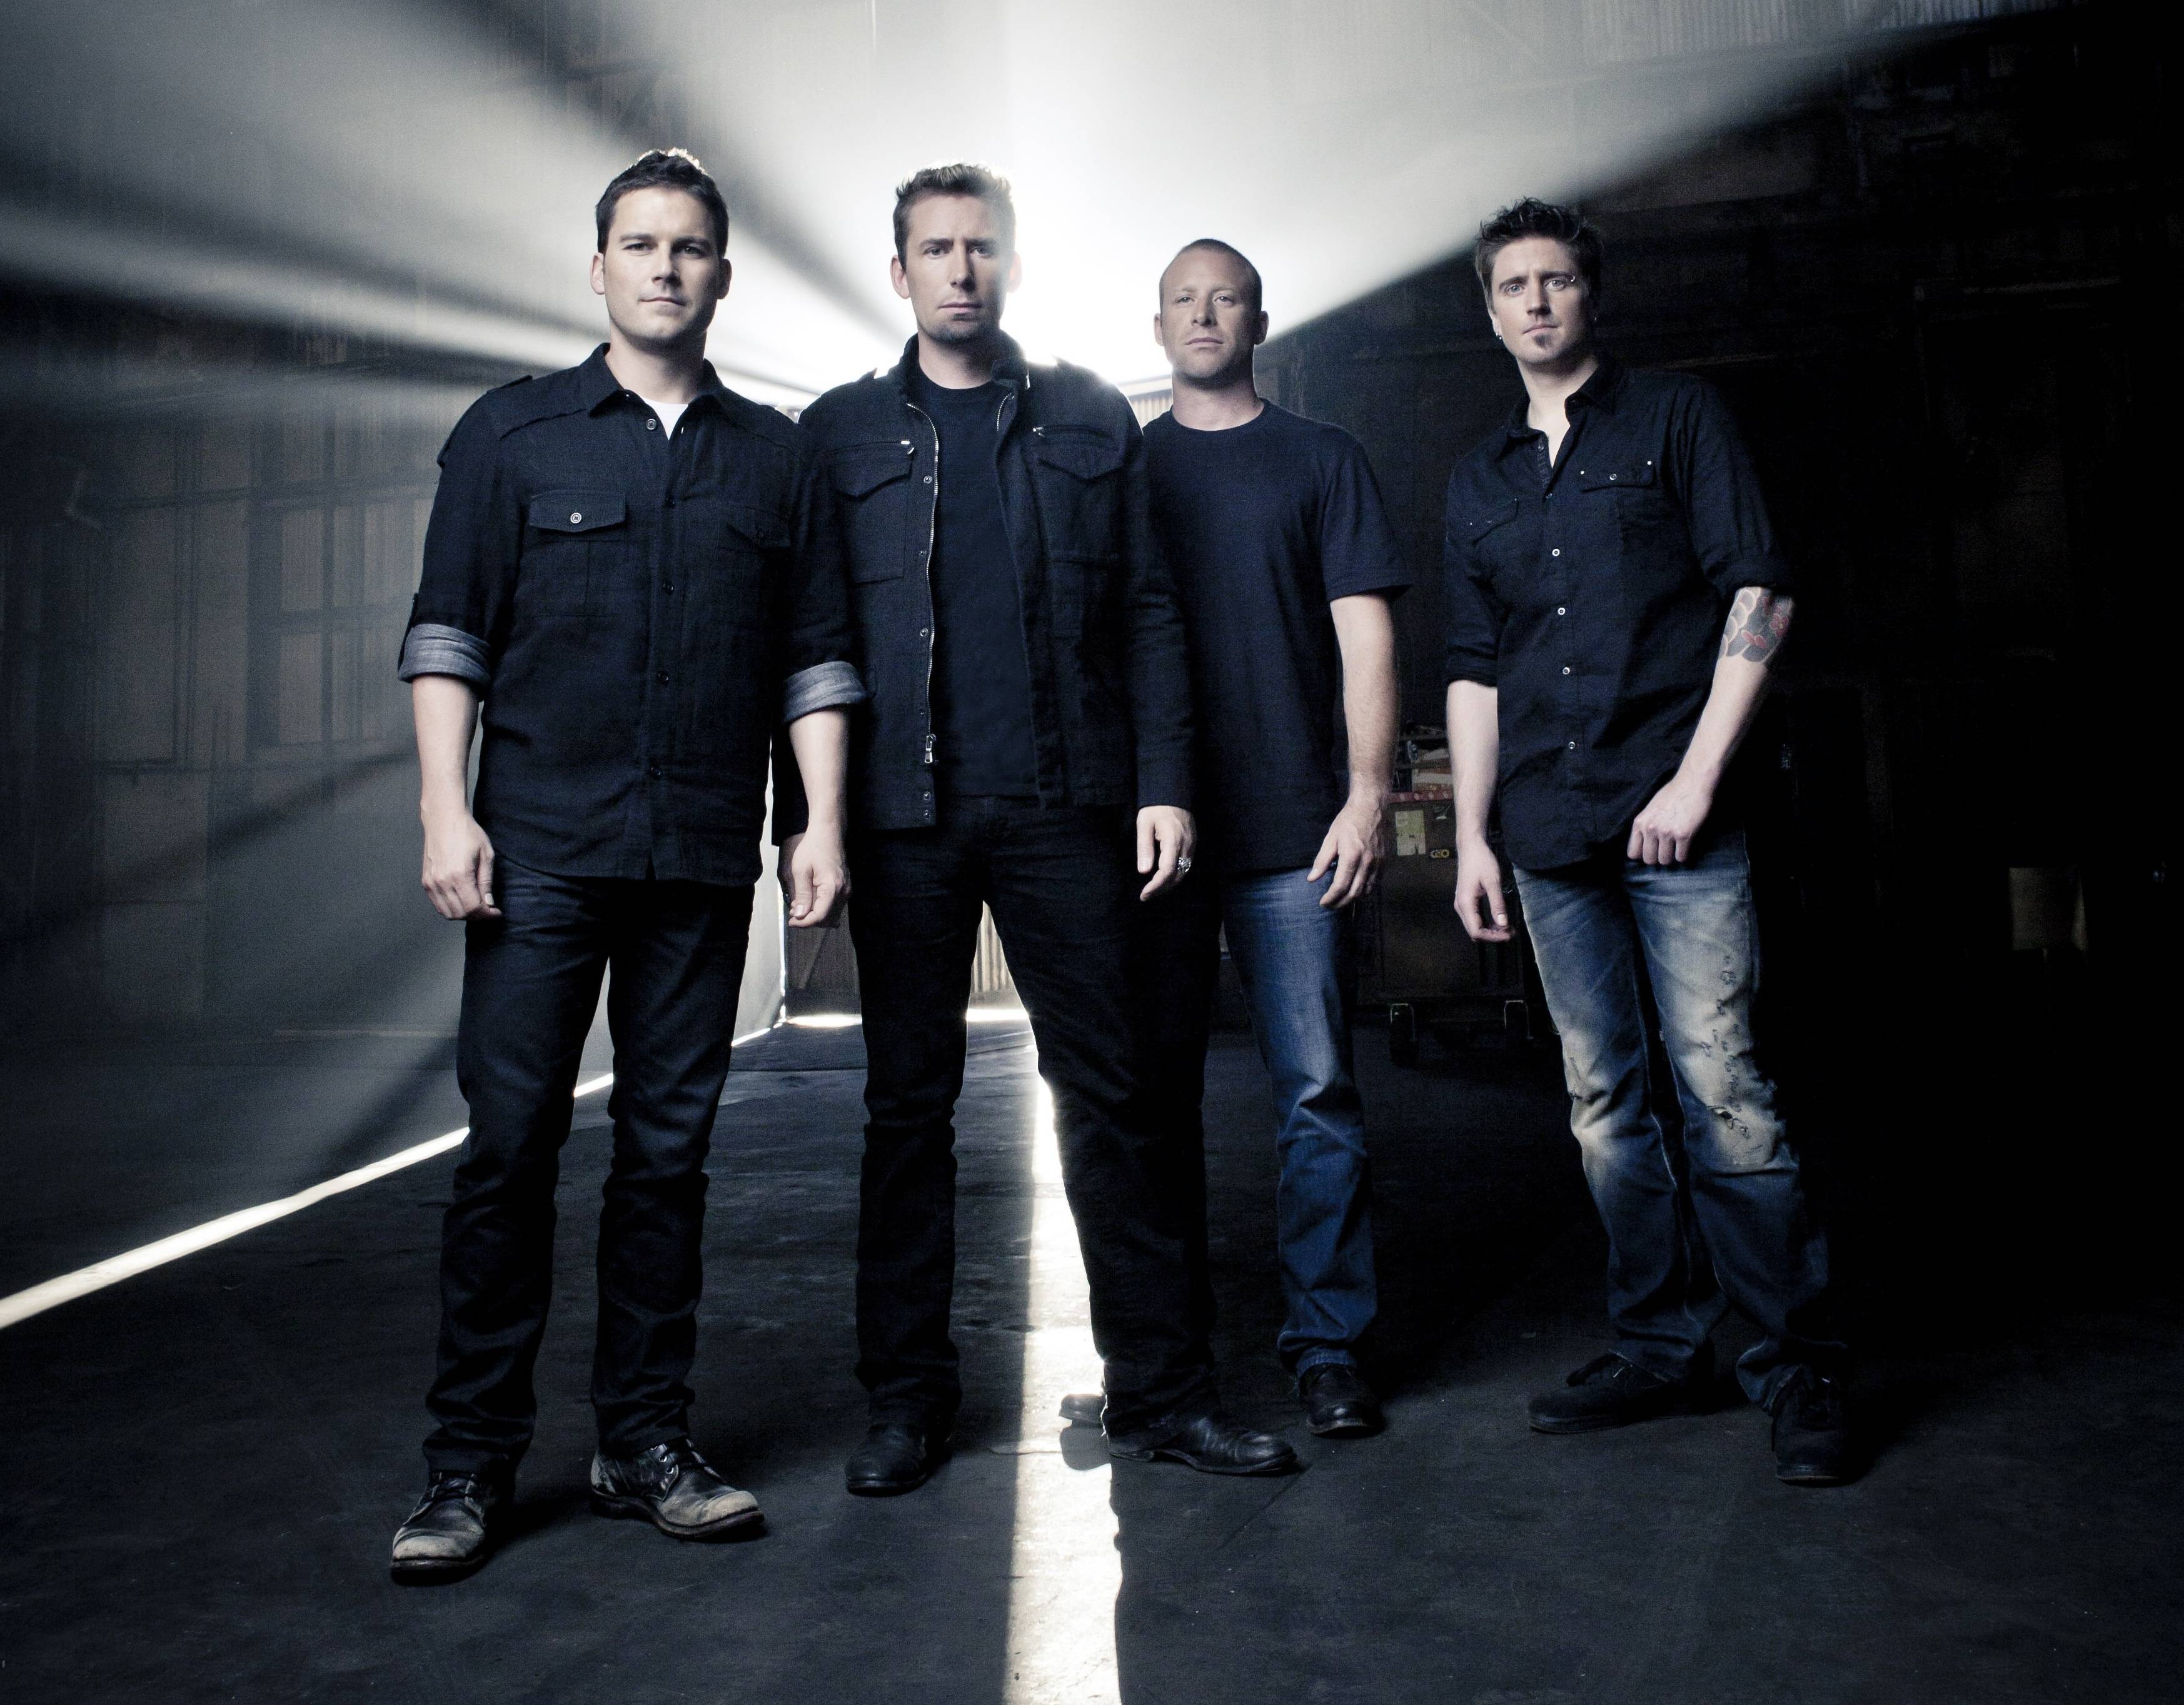 Popular band Nickelback wallpapers and image